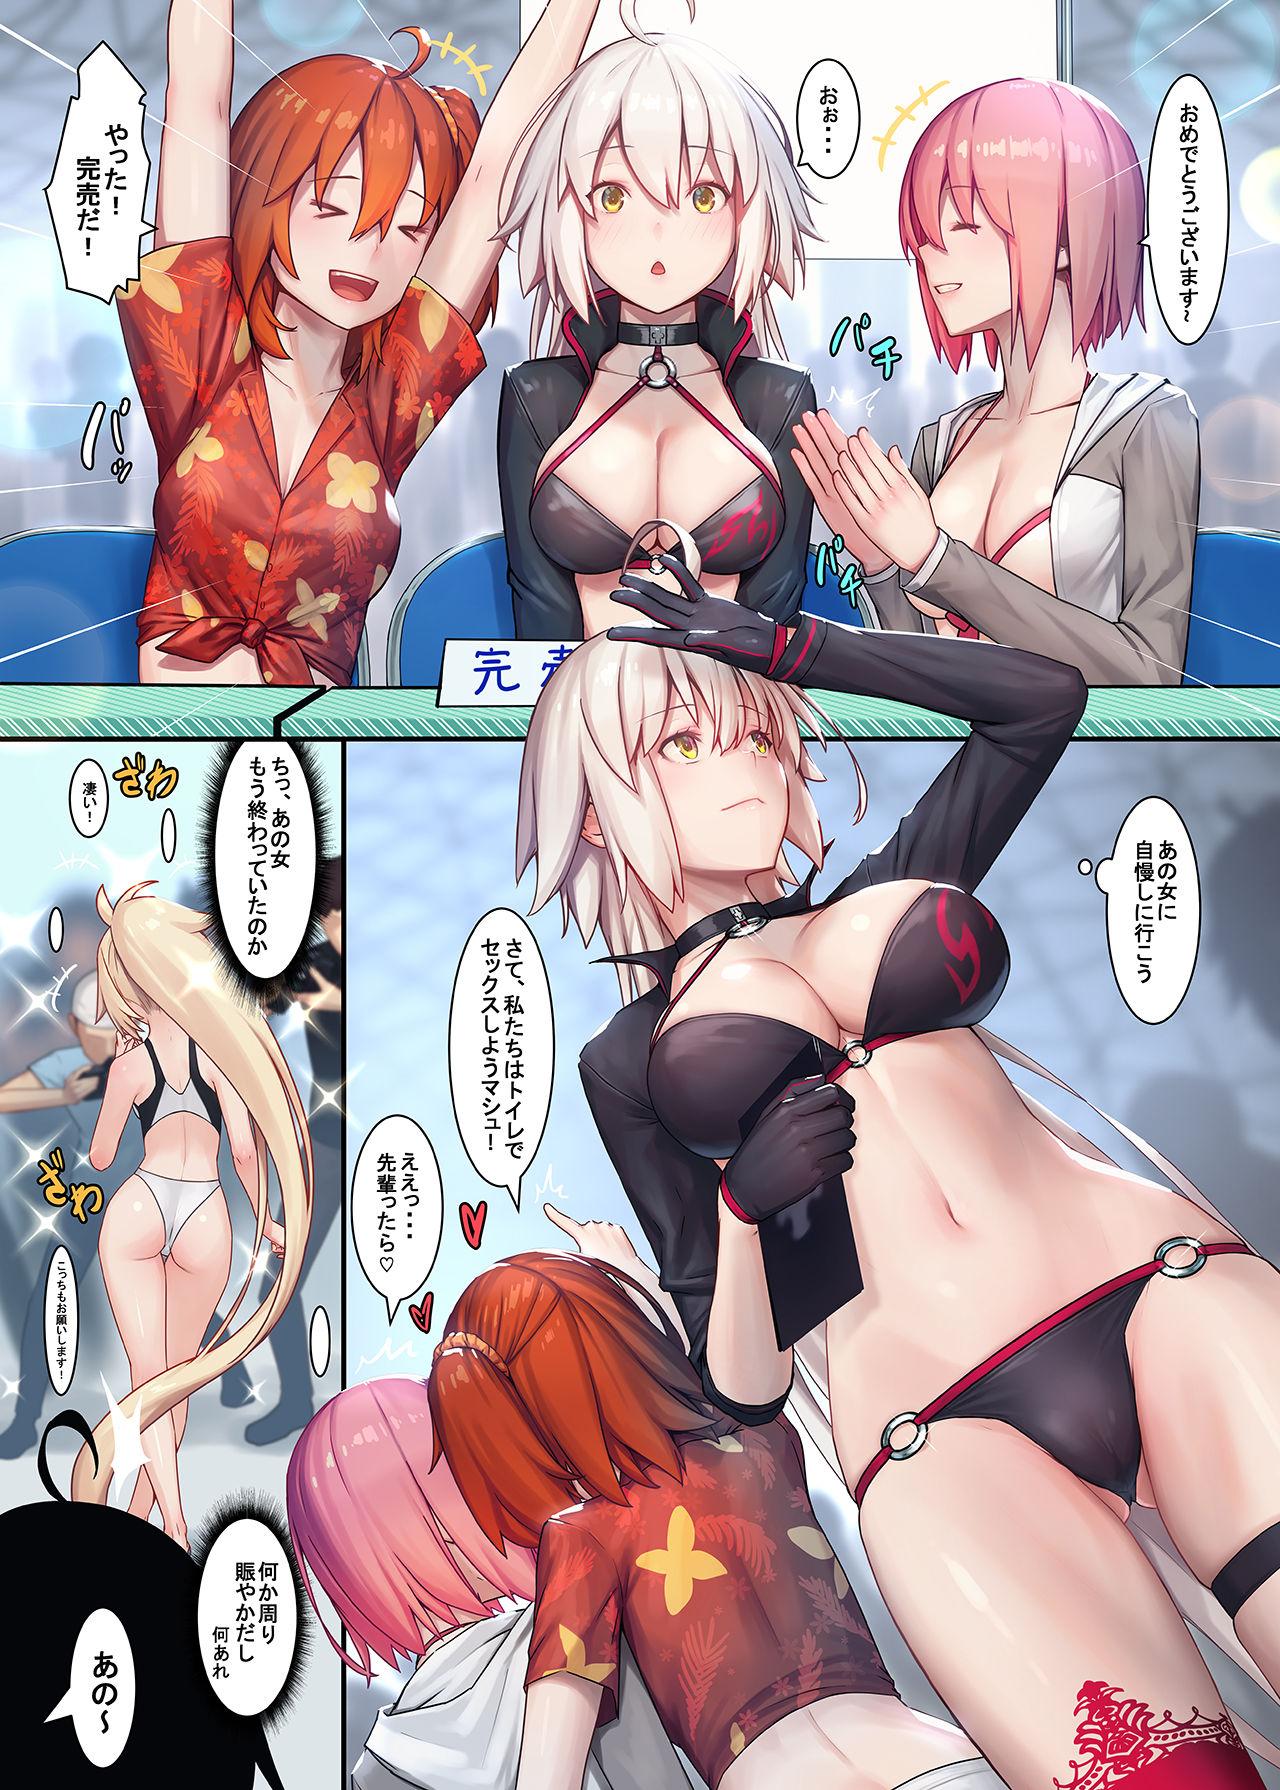 Female Orgasm Fate/Gentle Order 4 "Alter" - Fate grand order Gay Uncut - Page 3